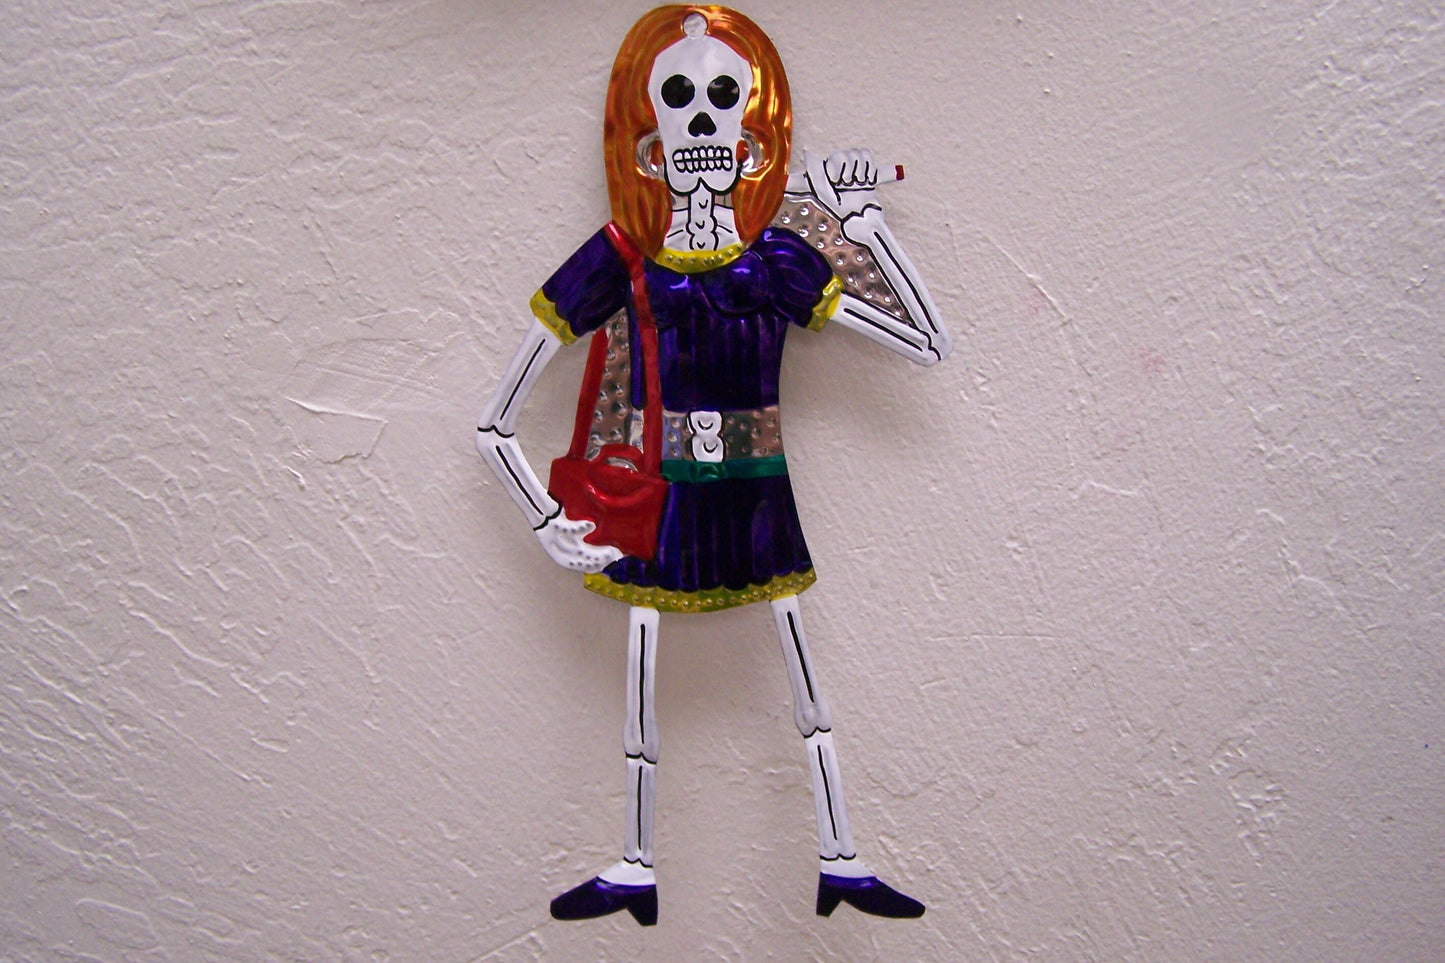 Large Painted Tin Day of the Dead Skeleton "Lady of the Evening" - Mexico